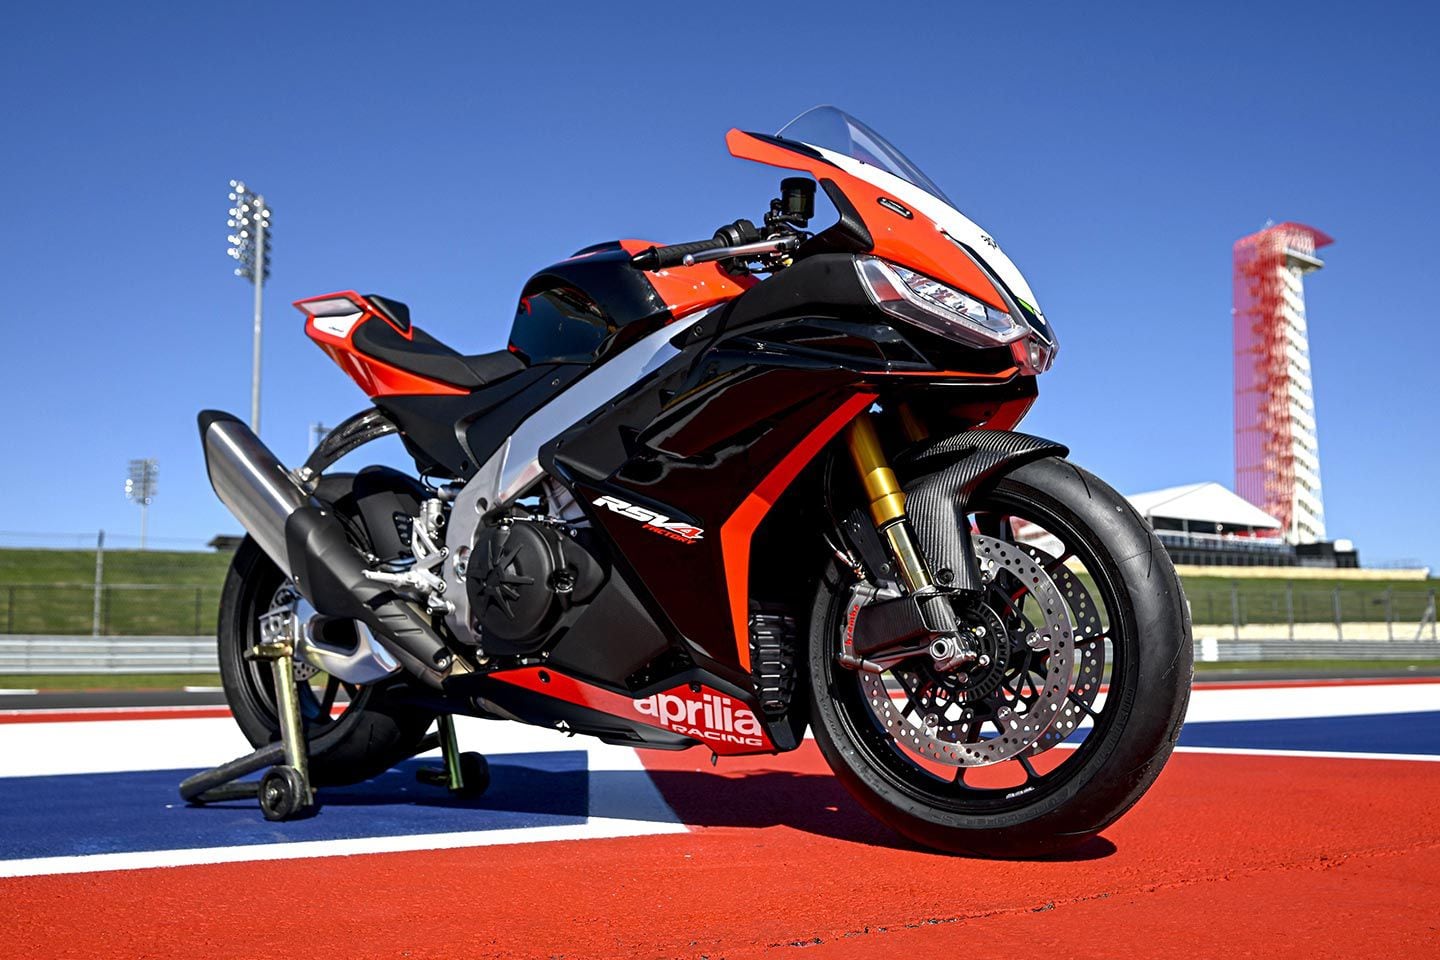 The new RSV4 Factory 1100 SE-09 SBK made its public debut at MotoGP weekend at Circuit of the Americas.